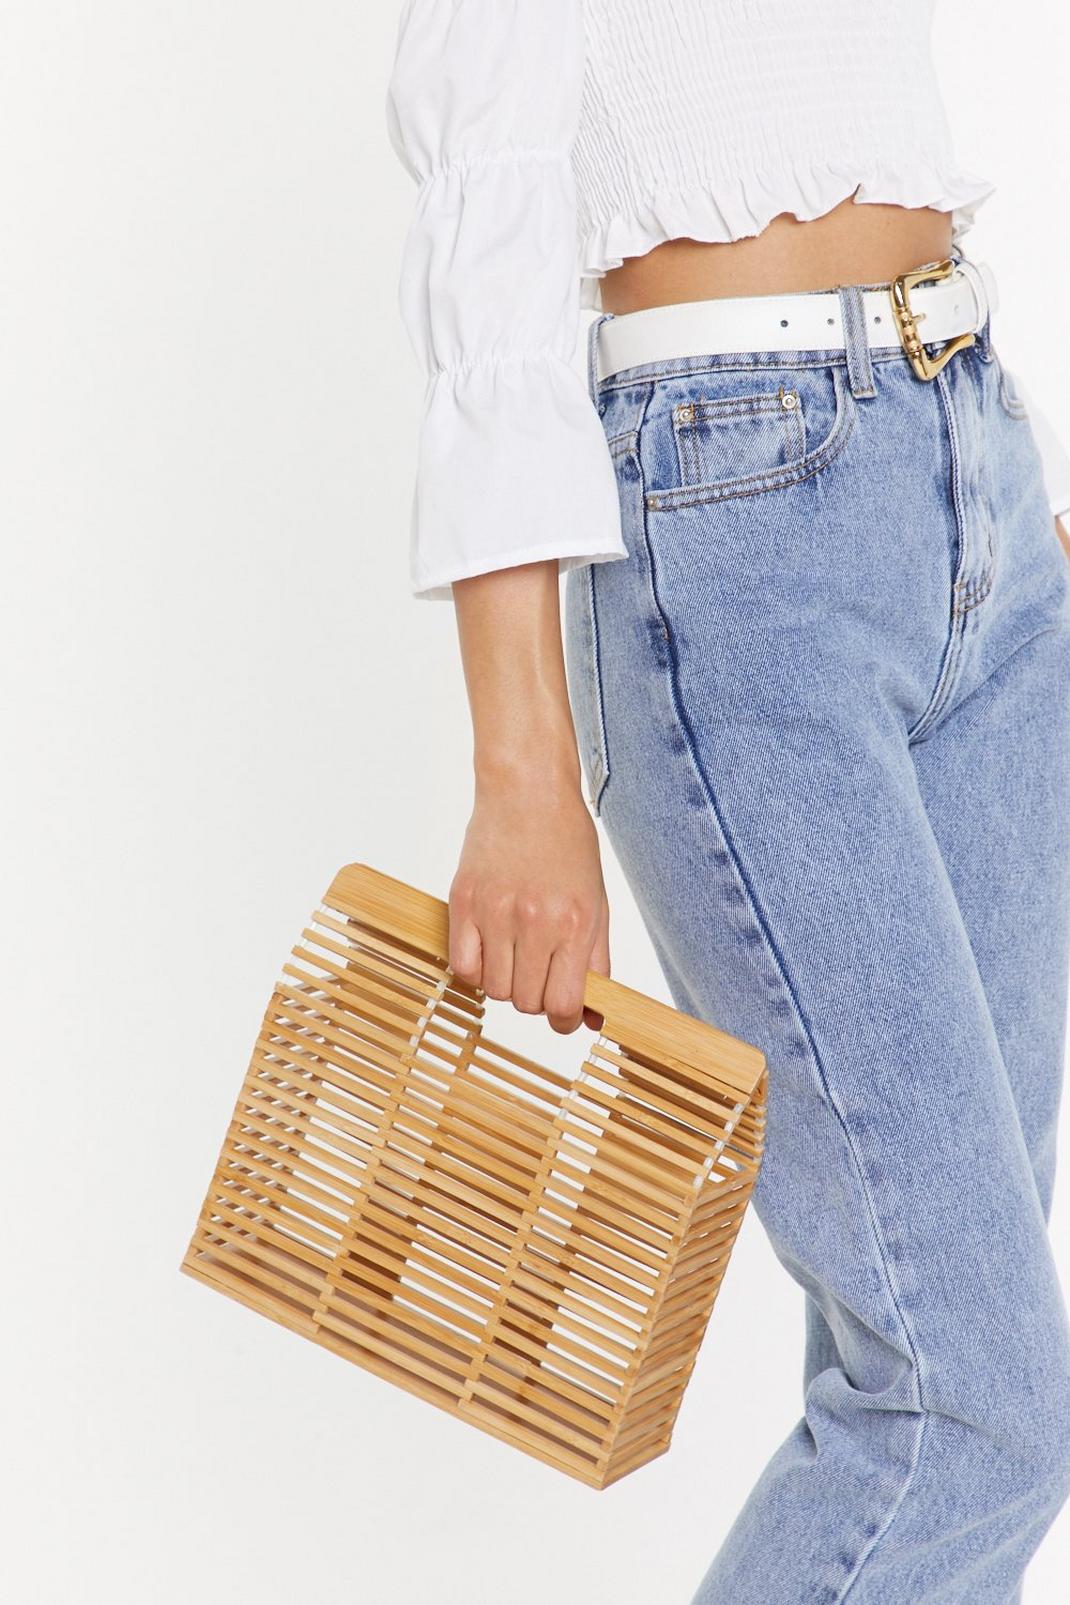 WANT What Wood You Do Wooden Structured Bag | Nasty Gal